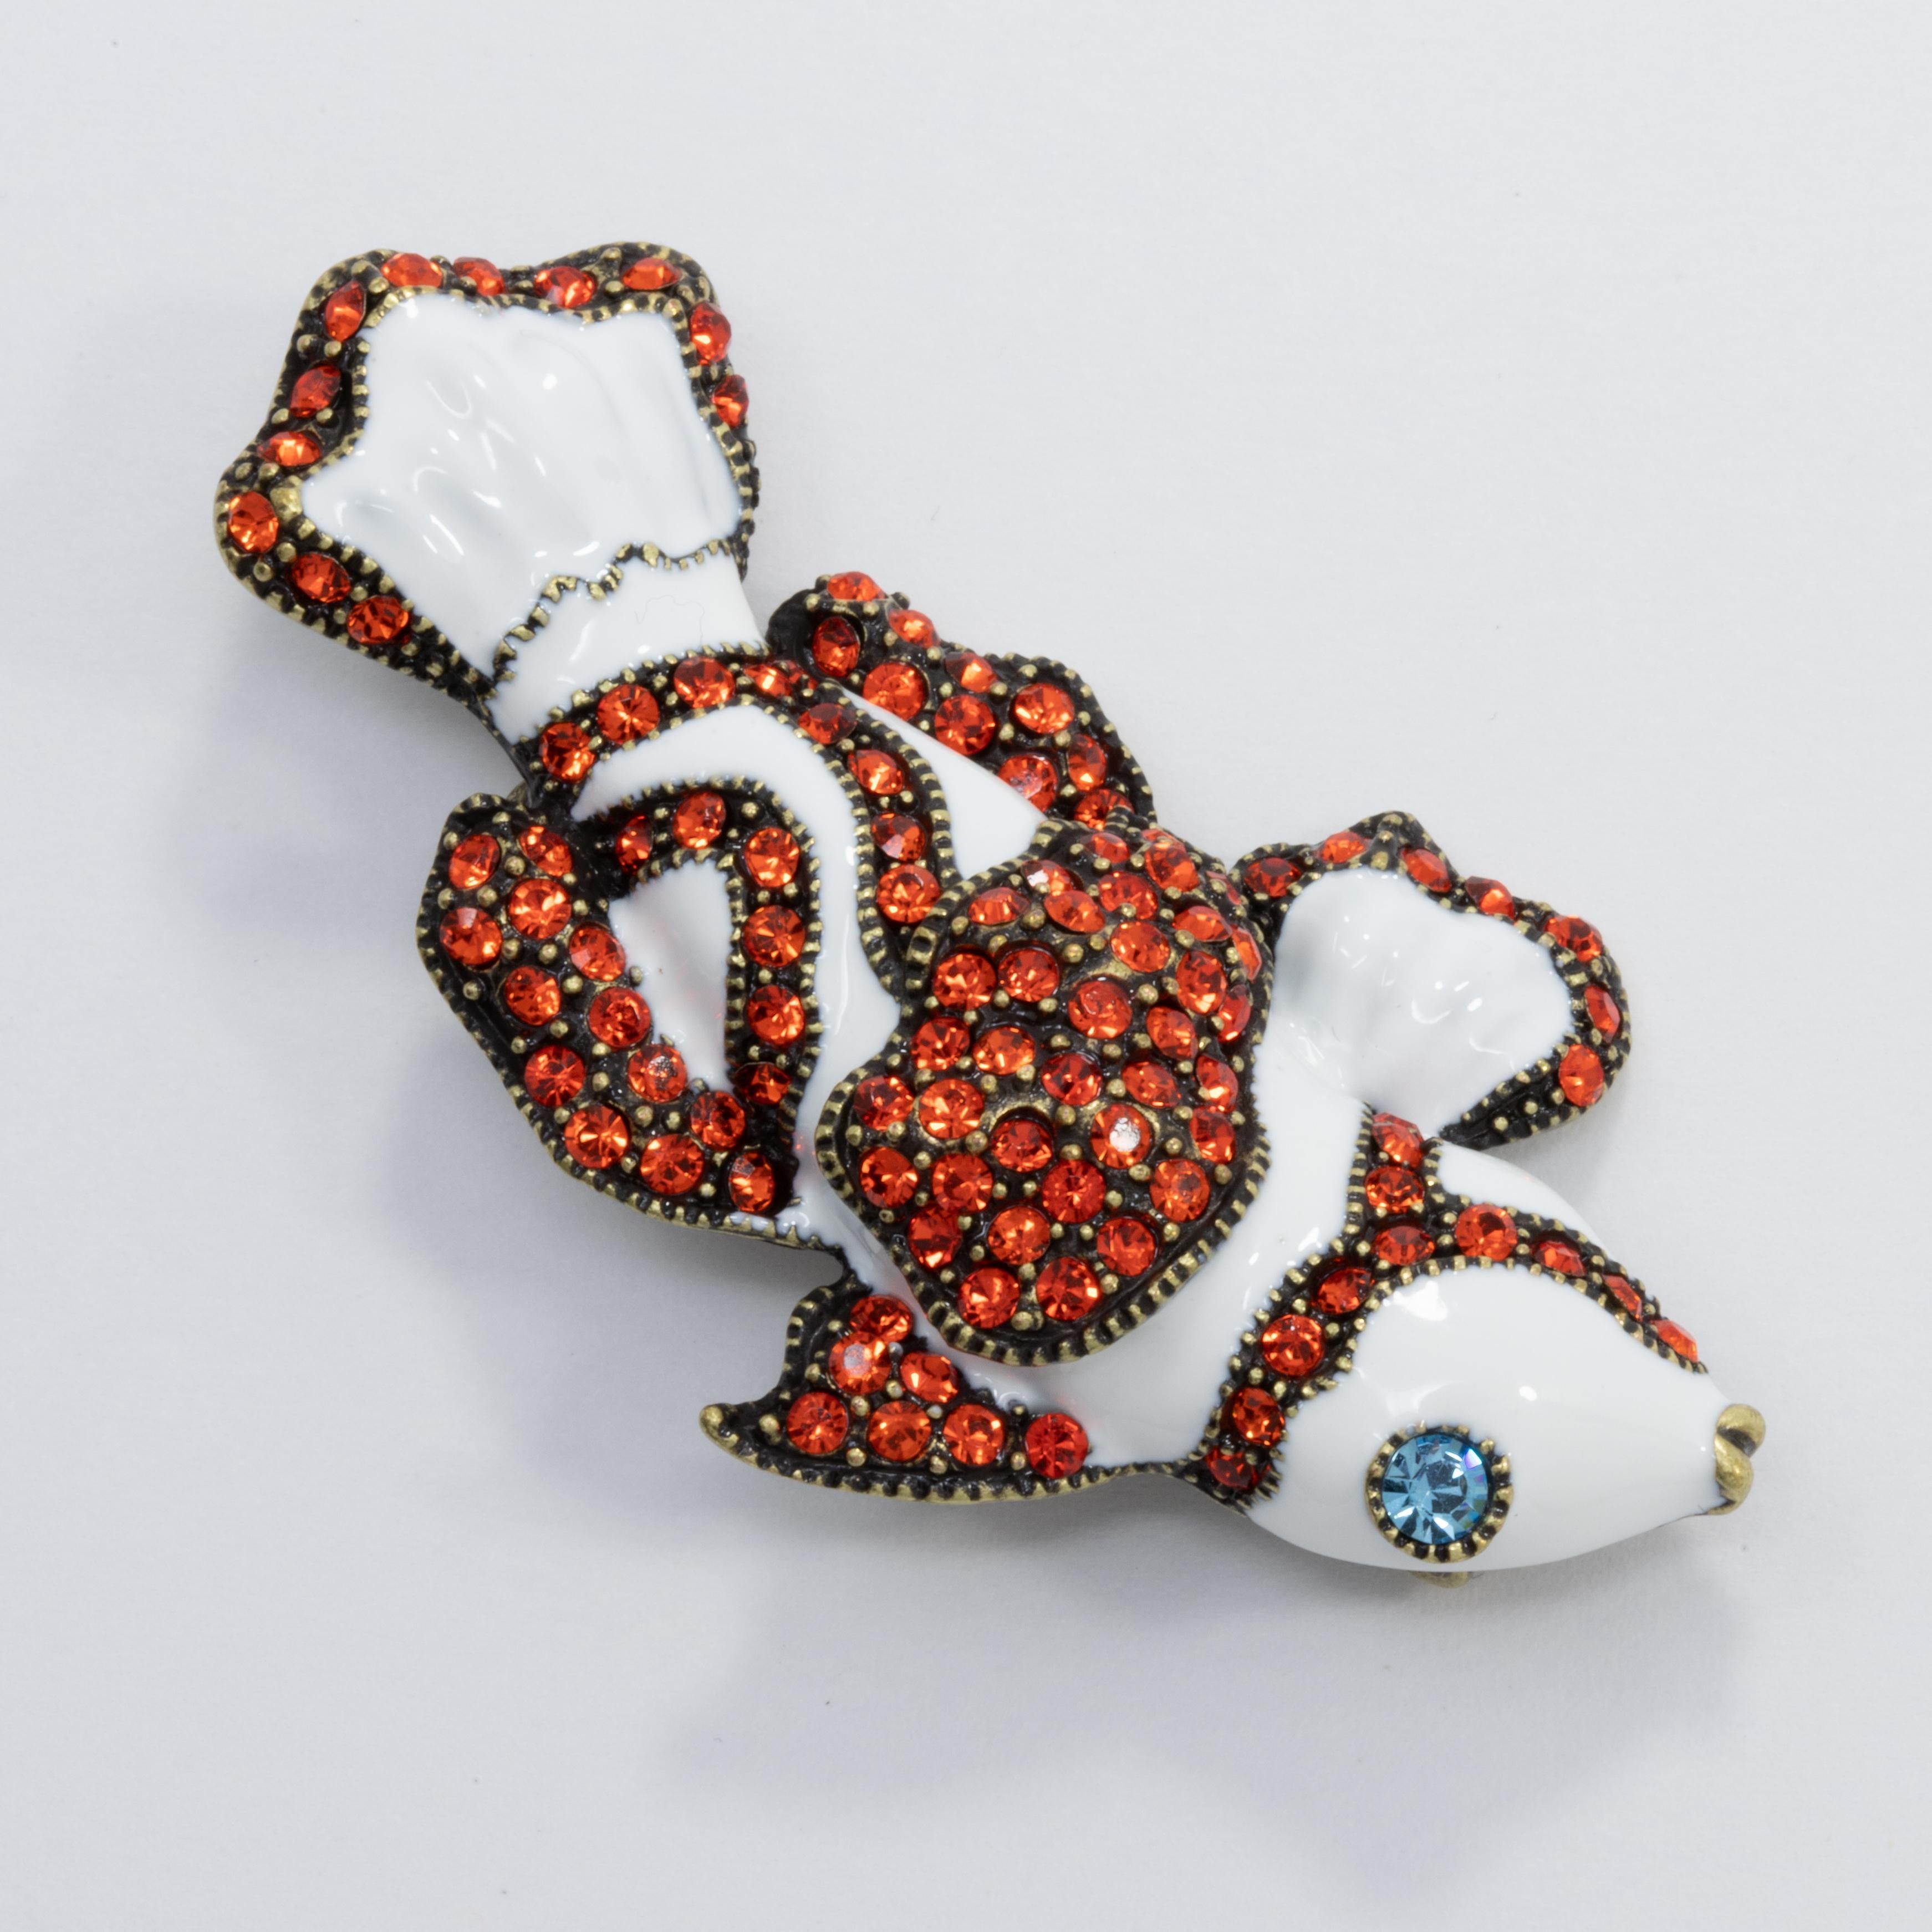 Glamorous ocean-themed pin brooch from Heidi Daus. An exotic clownfish, decorated with tangerine crystals and white enamel.

Brass tone.

Marks / hallmarks: Heidi Daus, CN